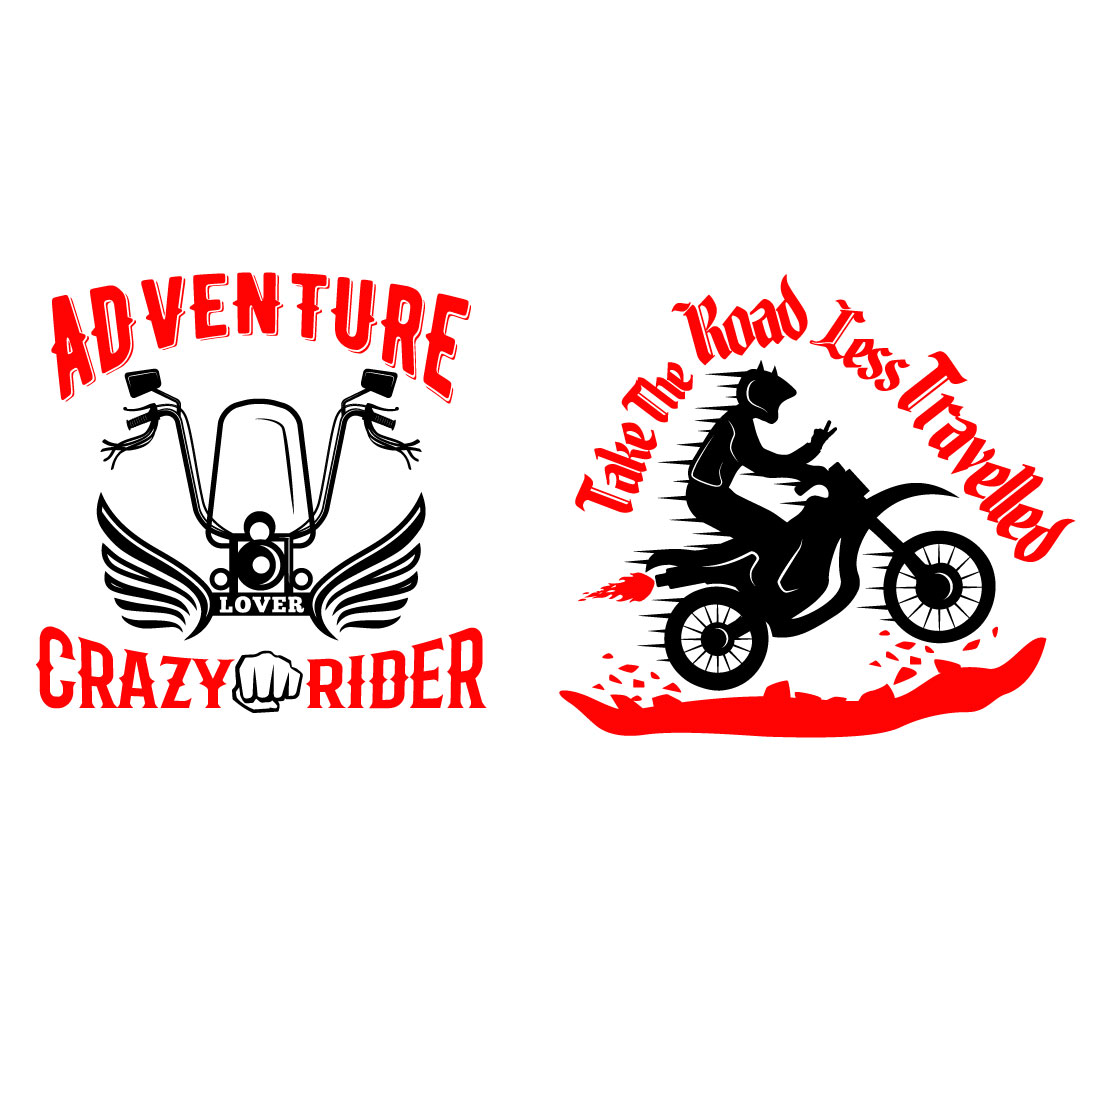 Logo emblem of the rider riding a mountain bike Vector Image